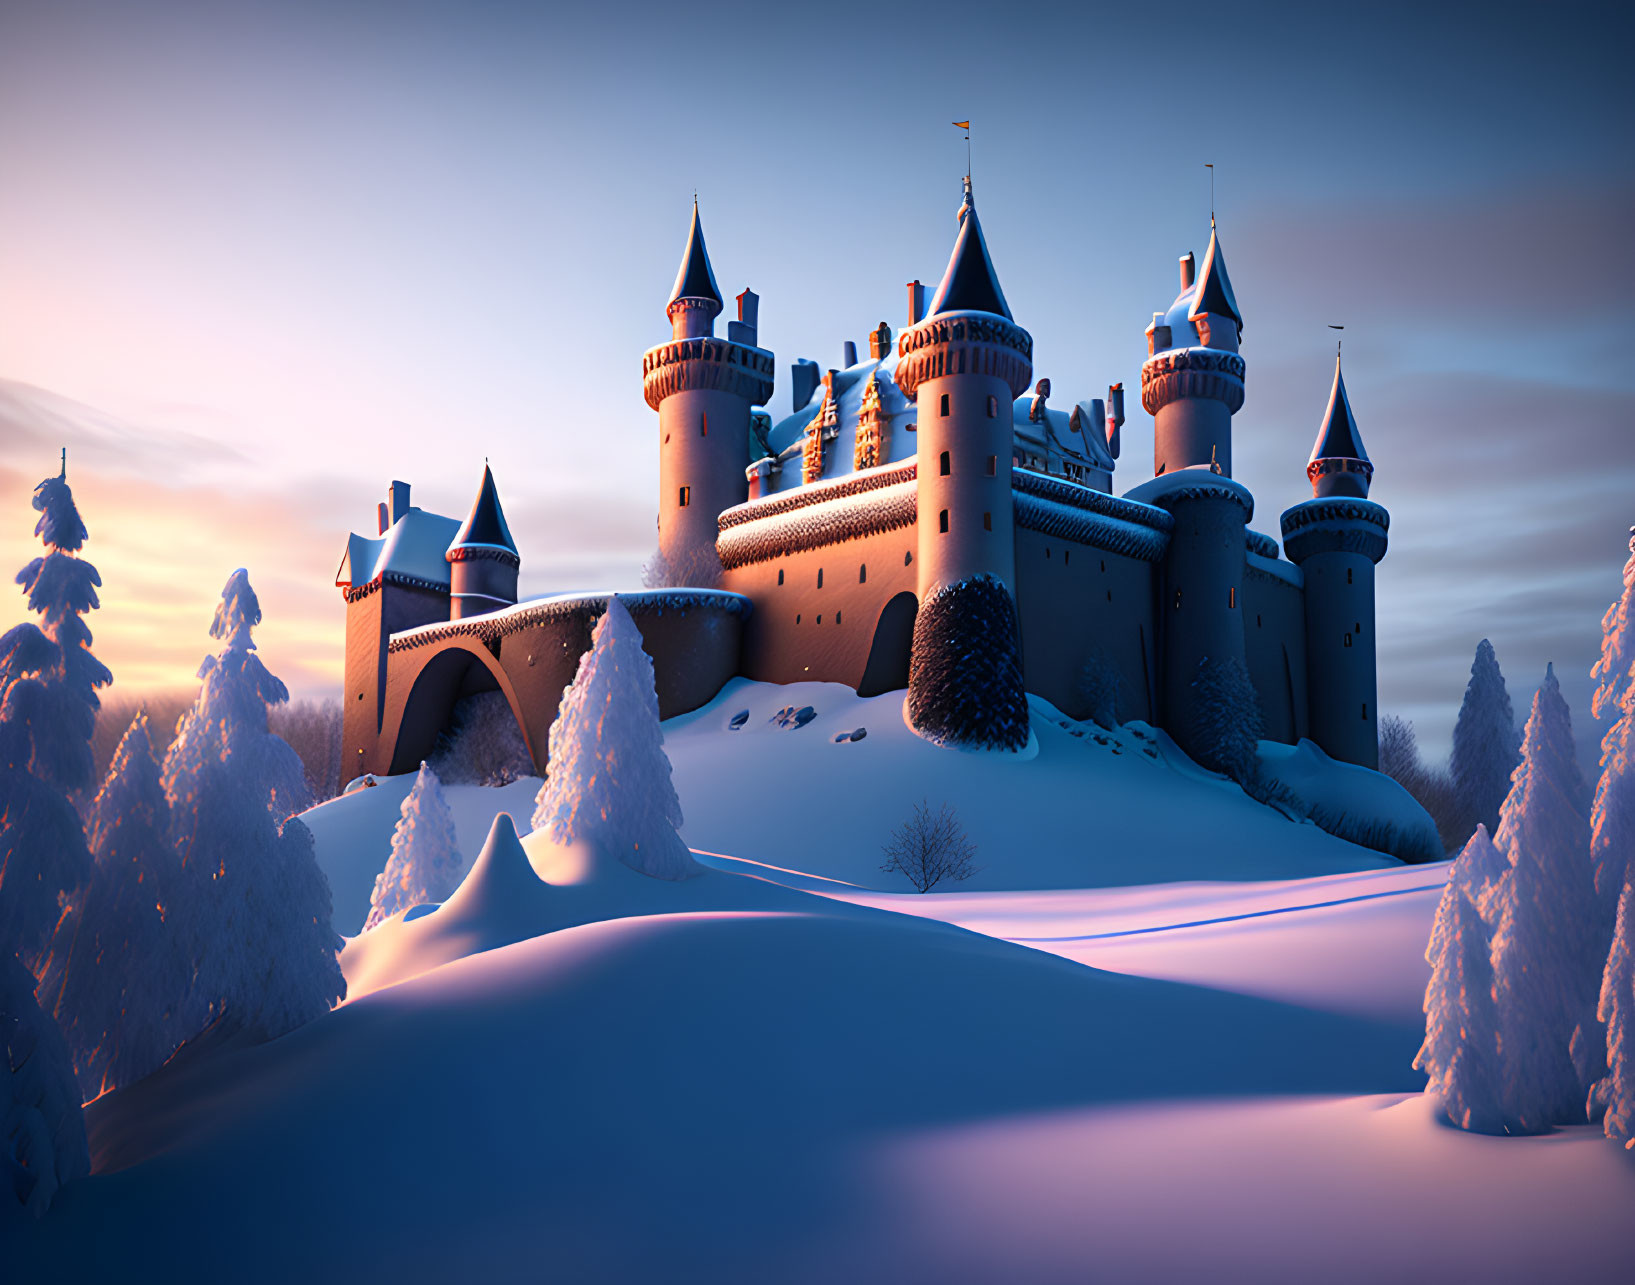 Majestic castle with turrets in snowy twilight landscape